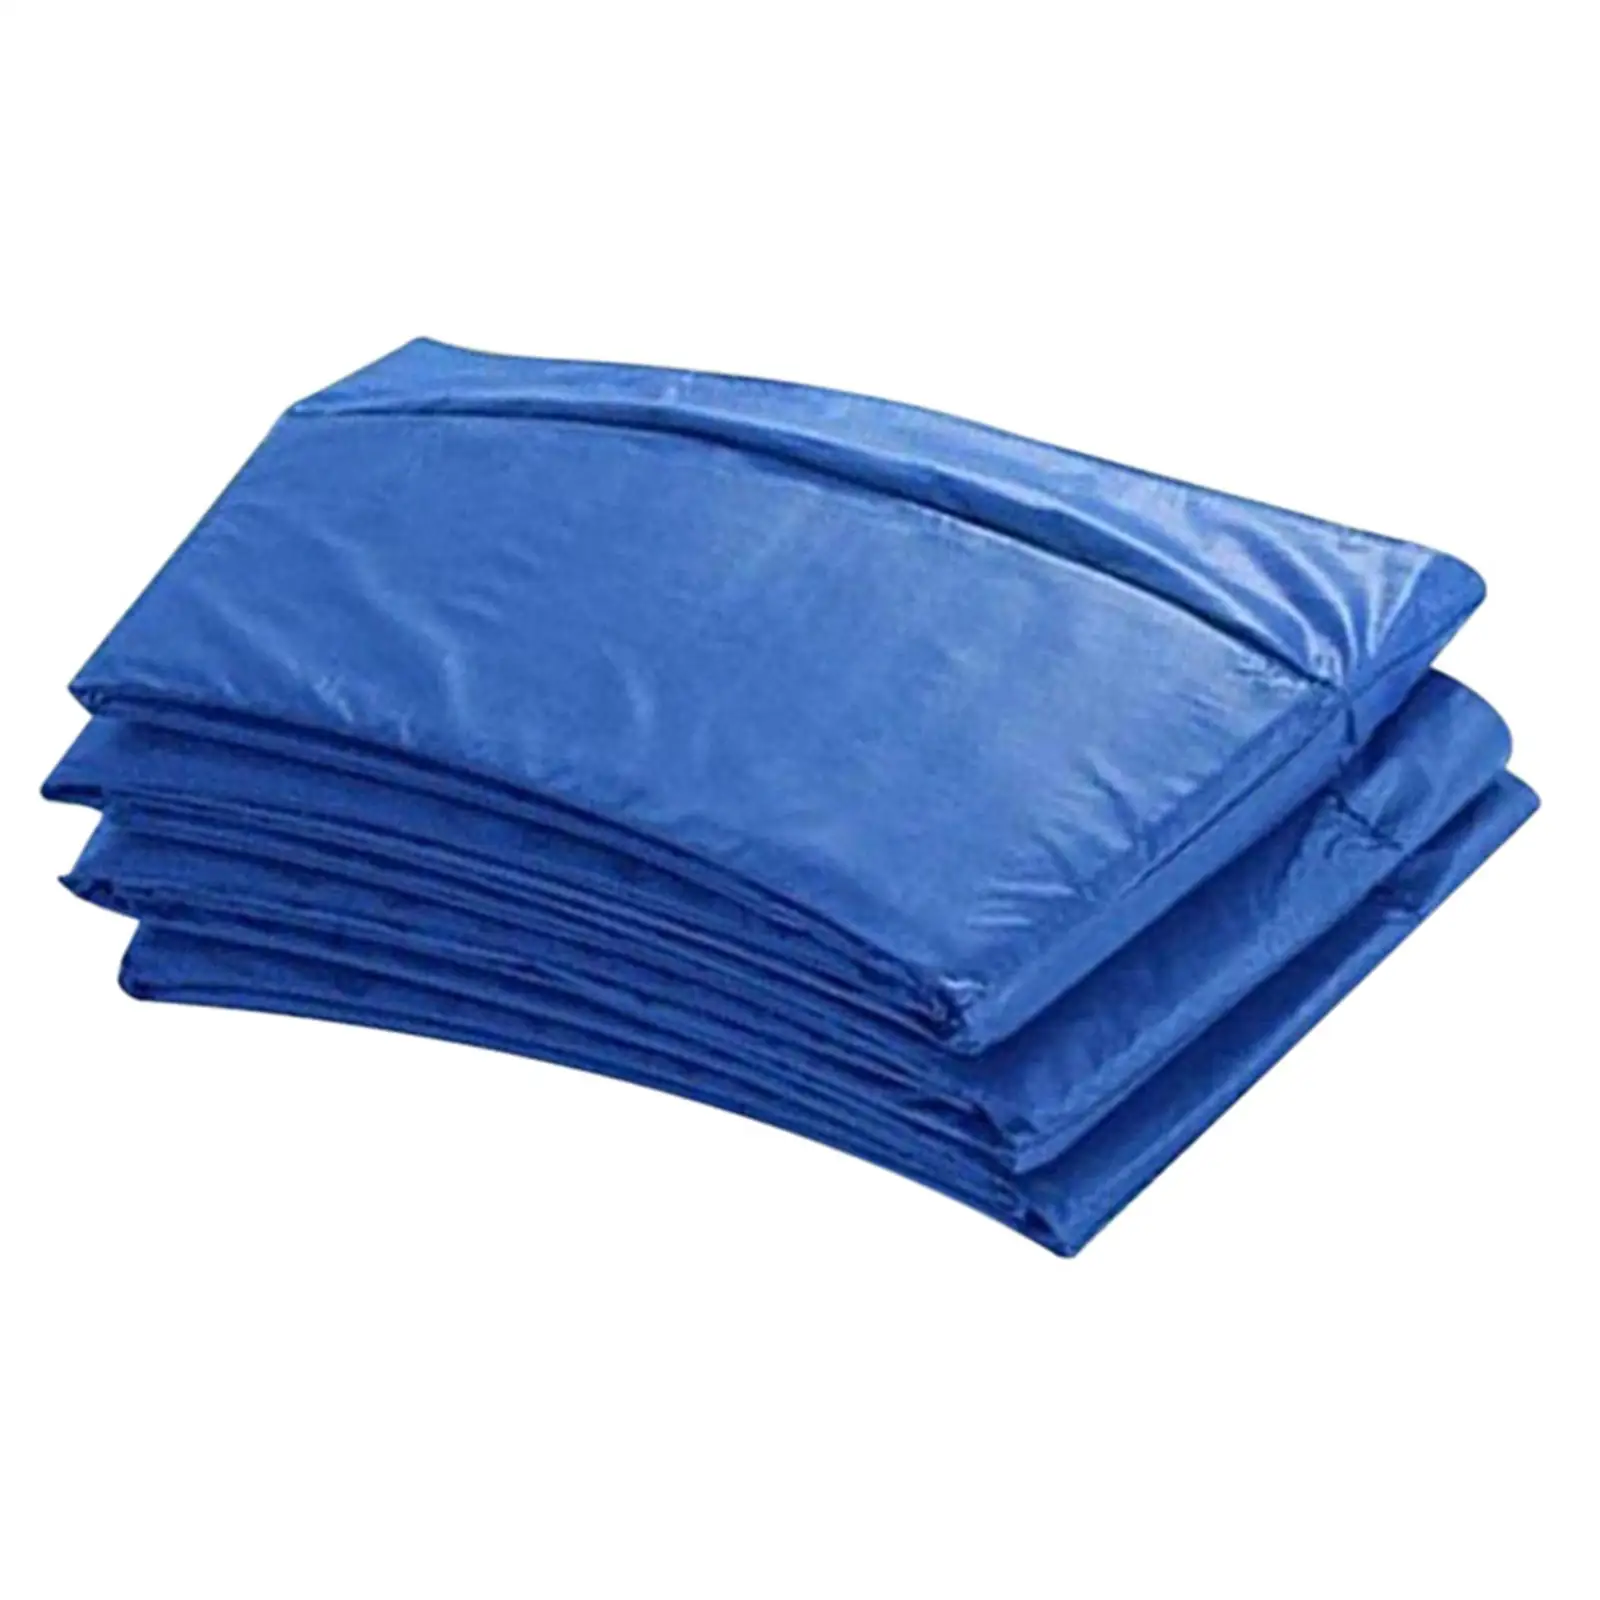 Trampoline Mat Trampoline Accessories Easy Install Spring Cover